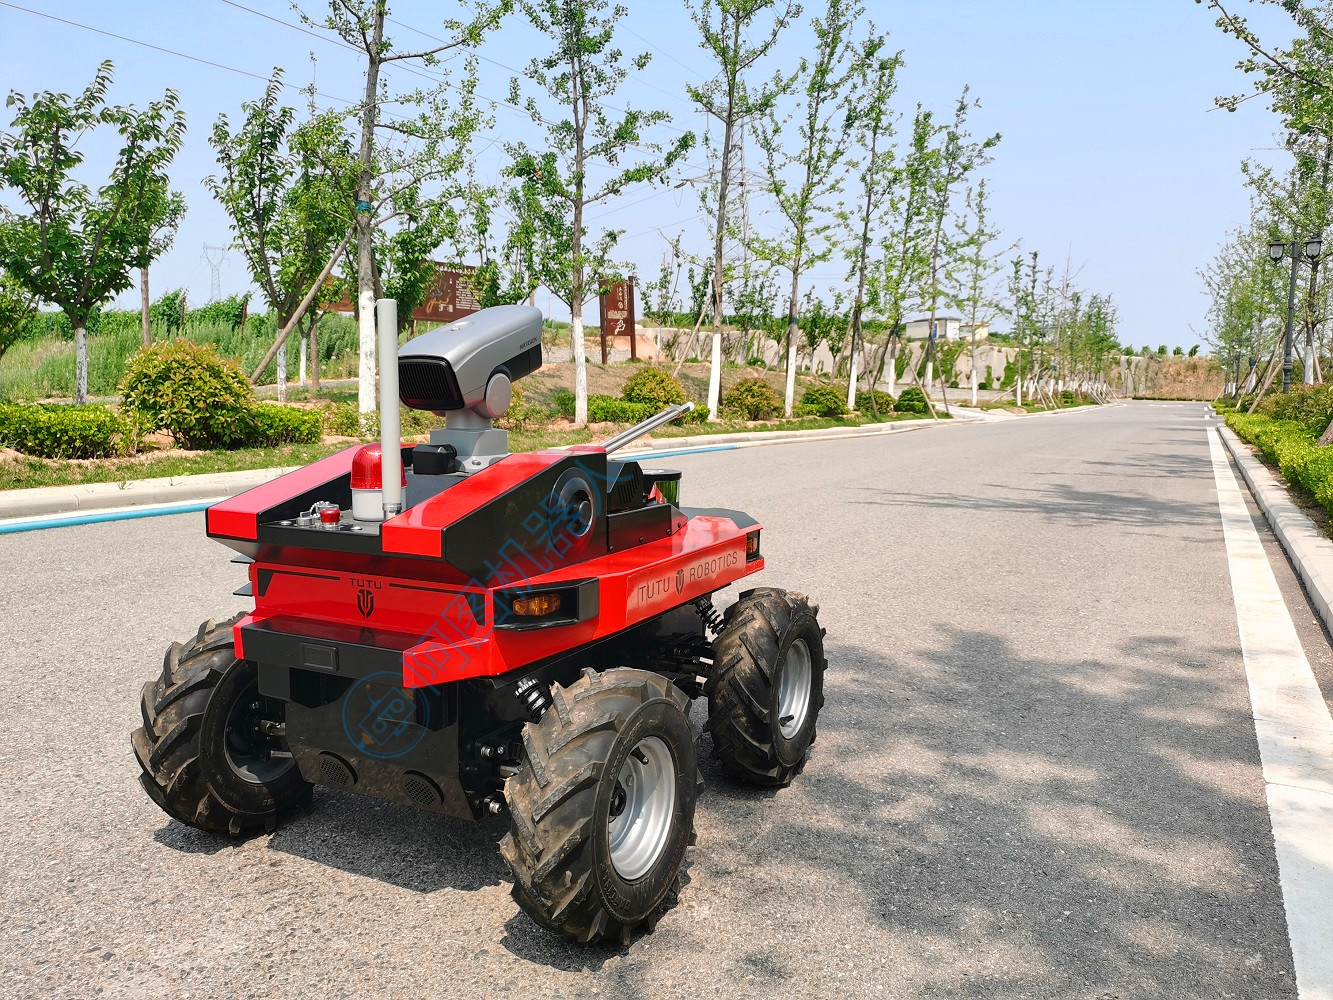 WT1000 Unmanned Inspection Robot Everyday Security Operation for Asset Protection